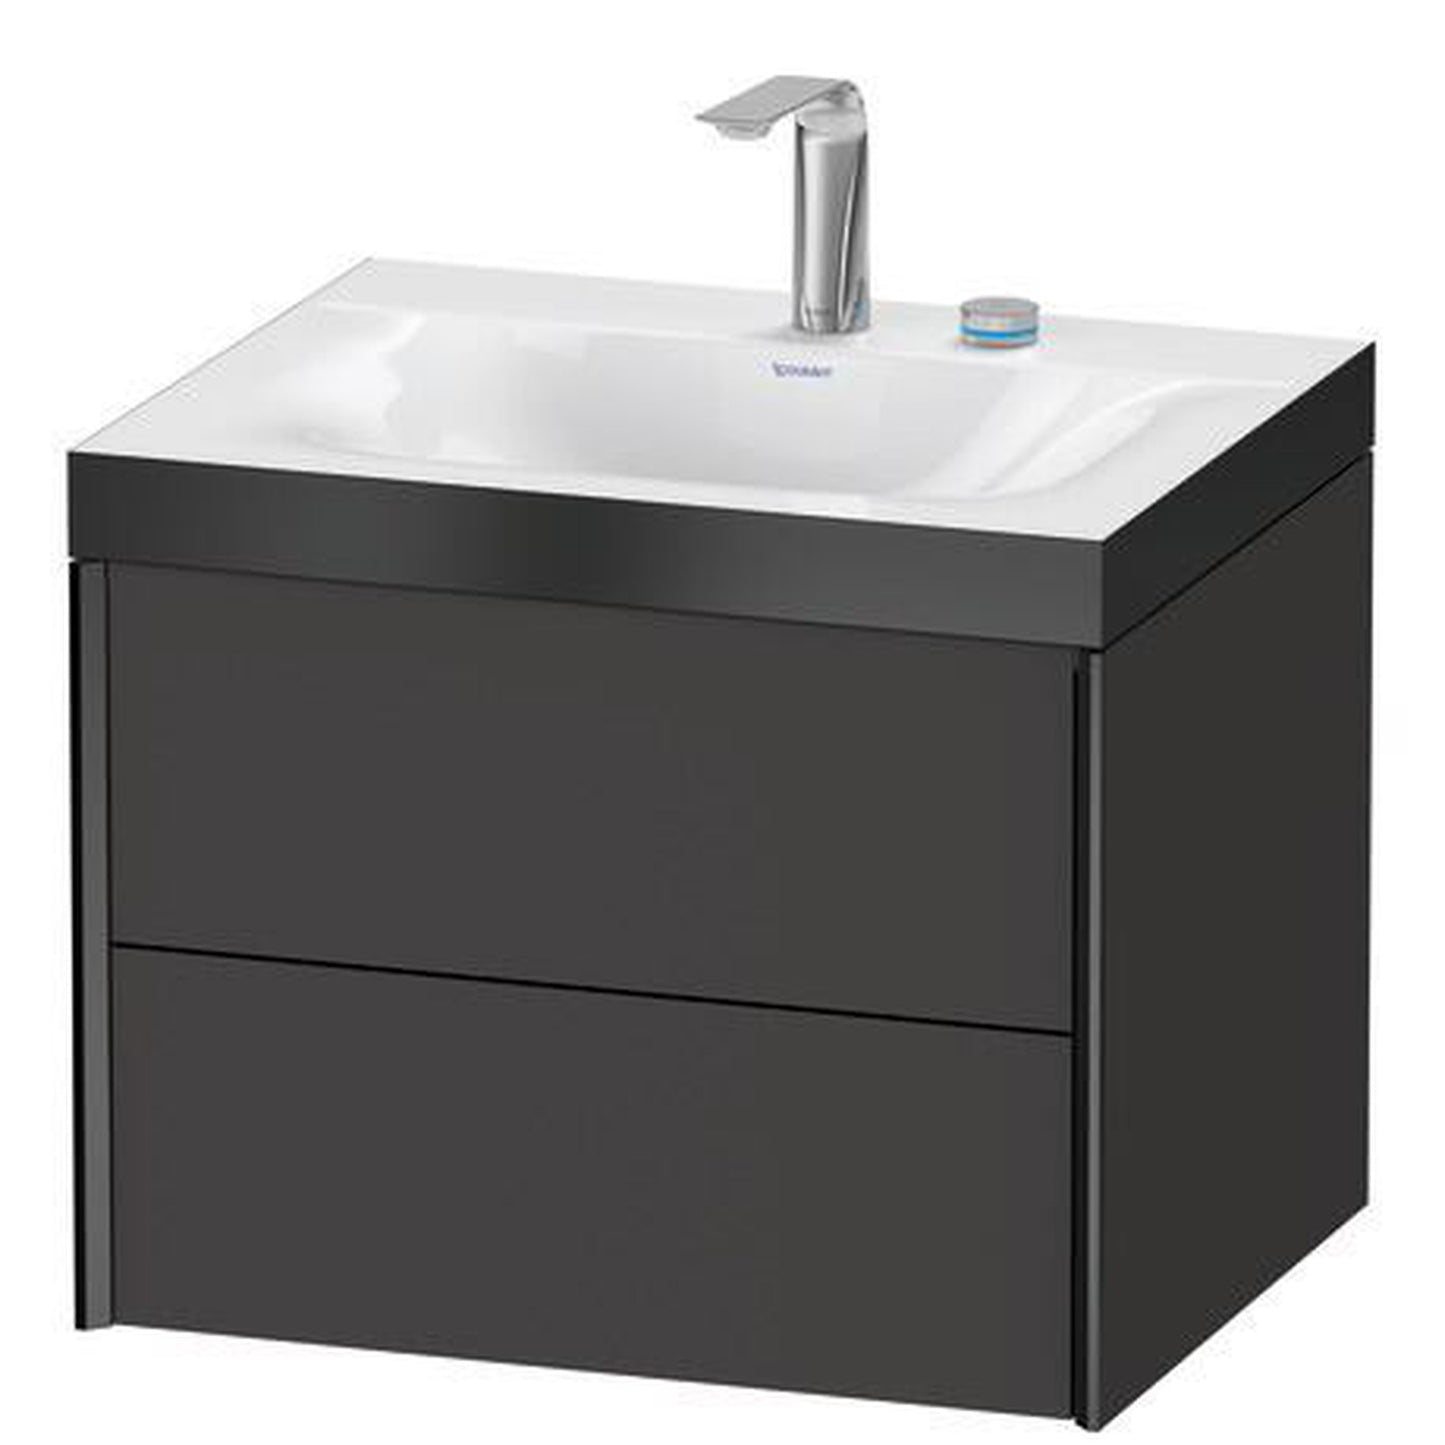 Duravit Xviu 24" x 20" x 19" Two Drawer C-Bonded Wall-Mount Vanity Kit With Two Tap Holes, Graphite (XV4614EB280P)